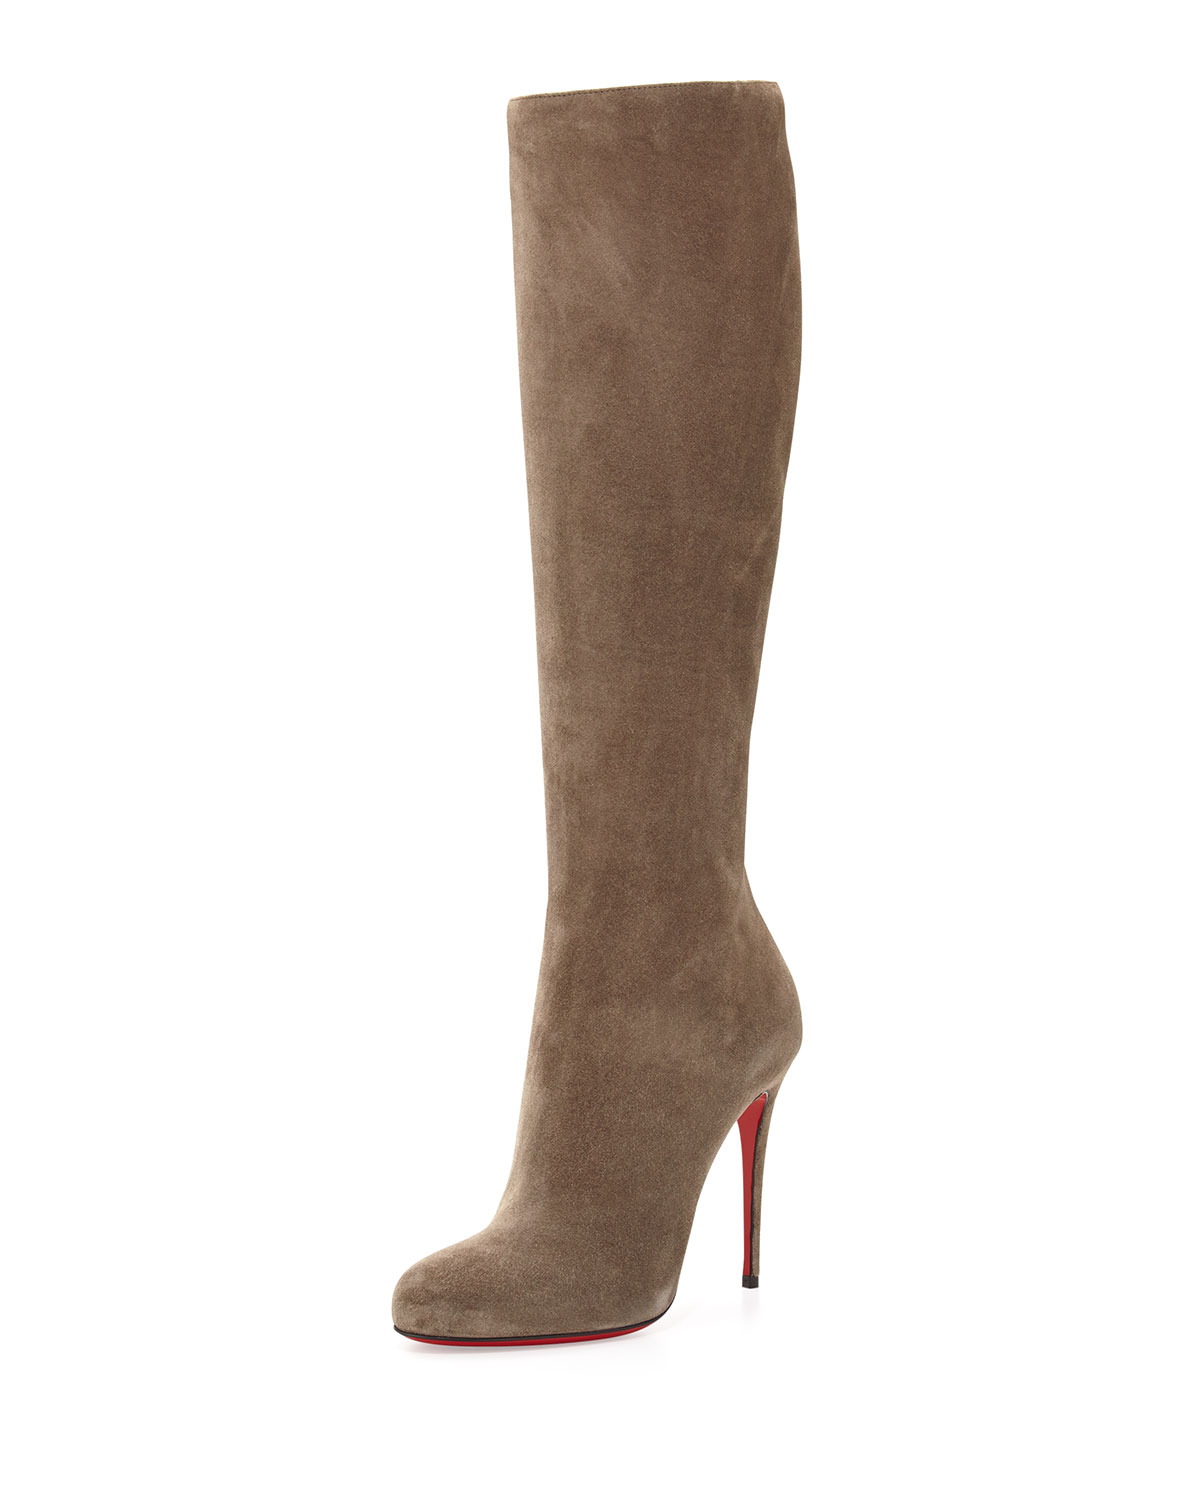 Christian Louboutin Fifi Botta Suede Knee-High Boots in Red (Gray) - Lyst